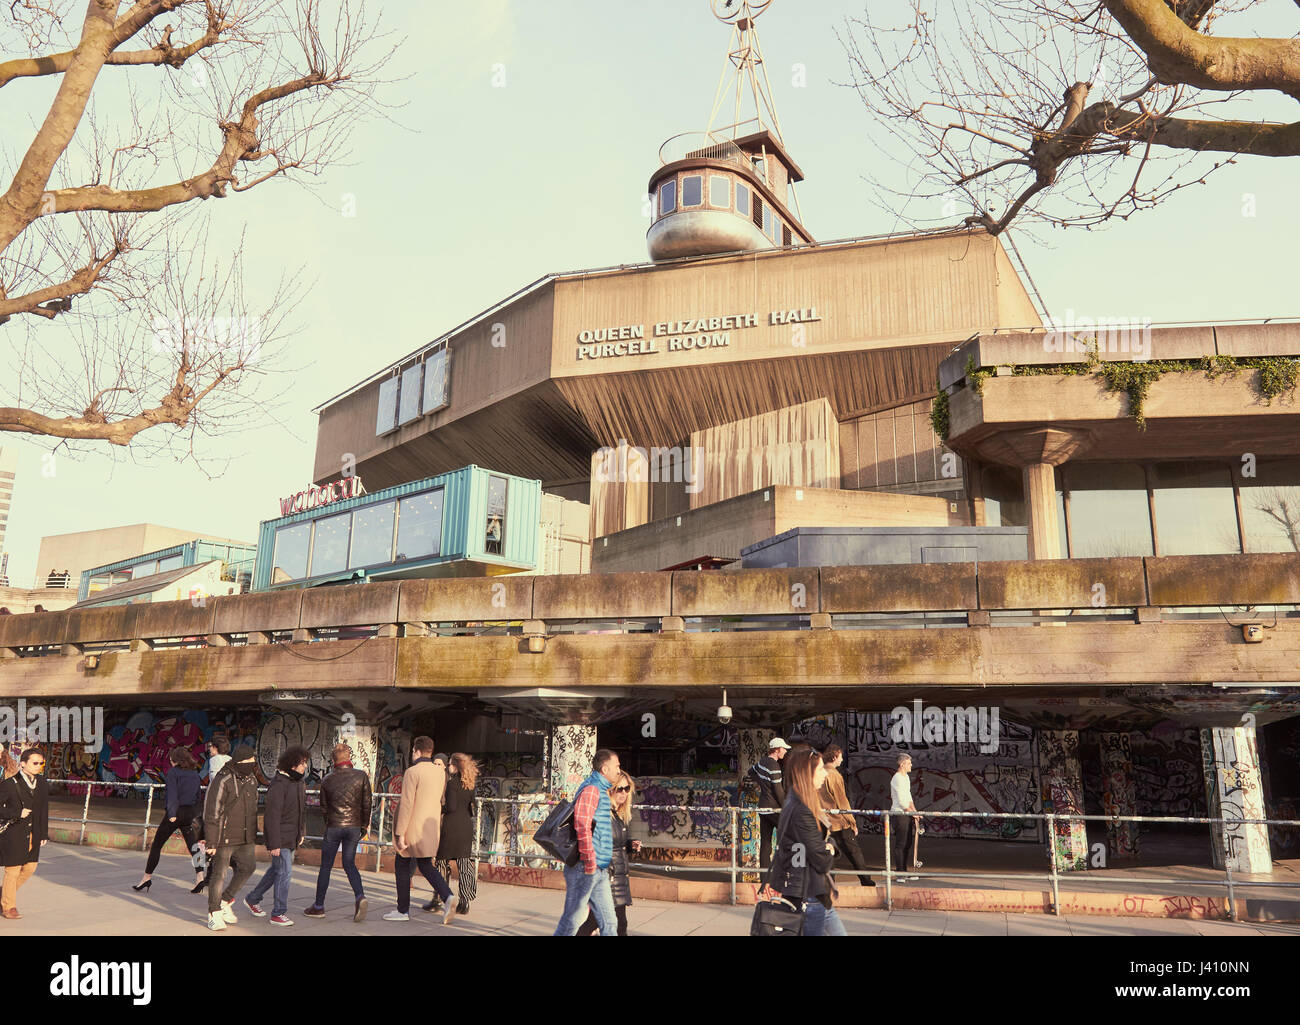 Queen Elizabeth Hall and Purcell Room (1967), South Bank, London, England Stock Photo